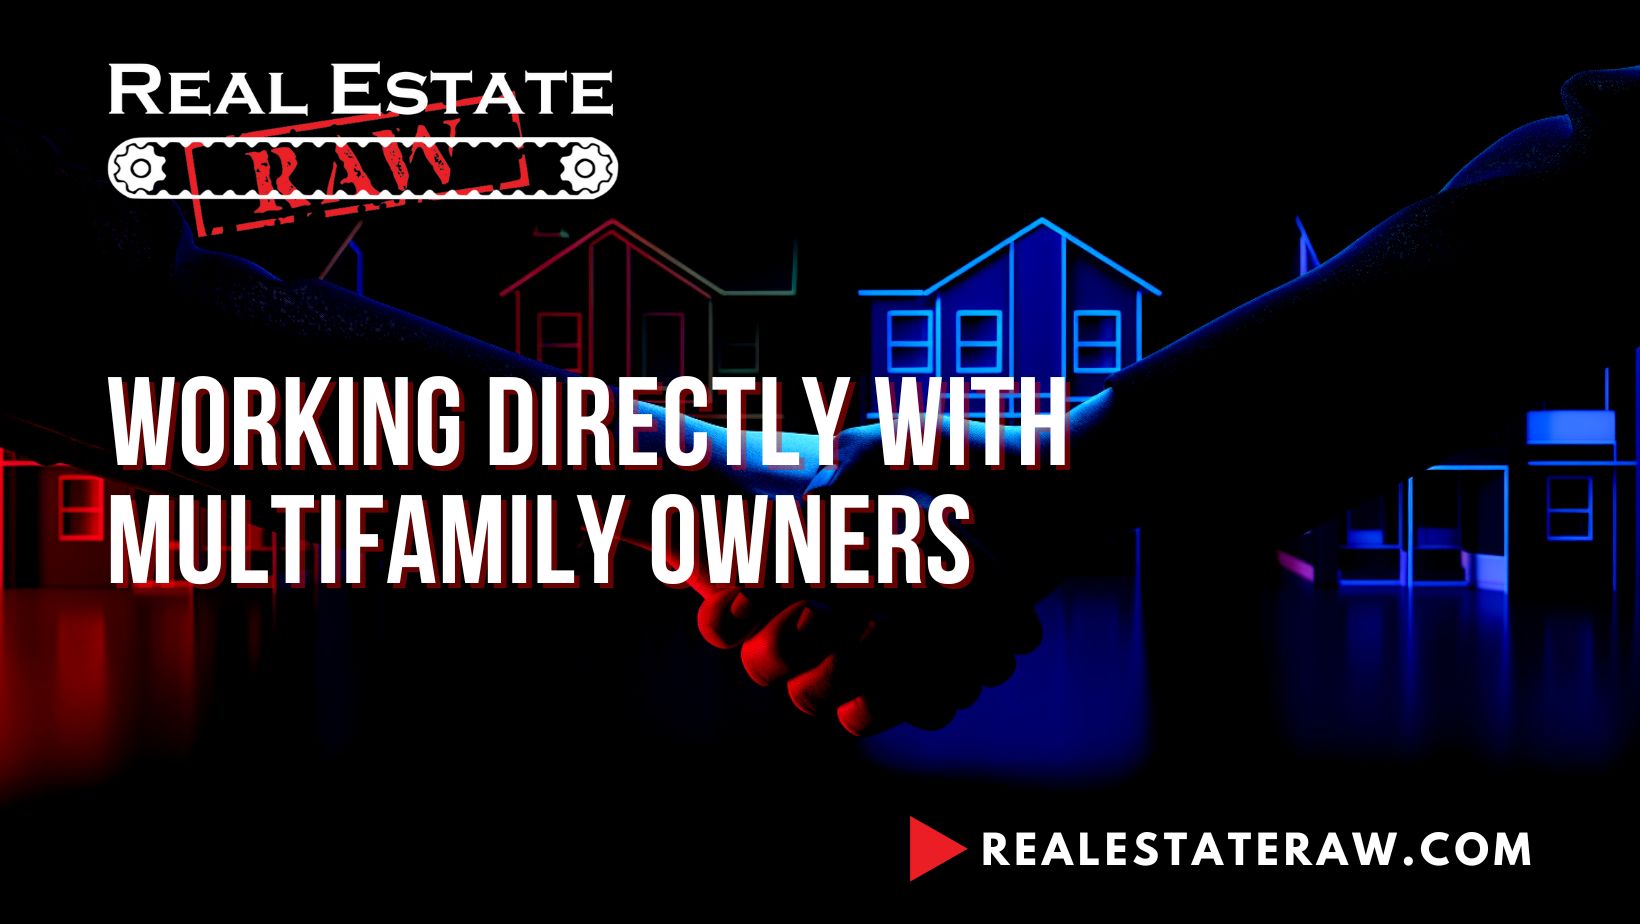 Working Directly with Multifamily Owners